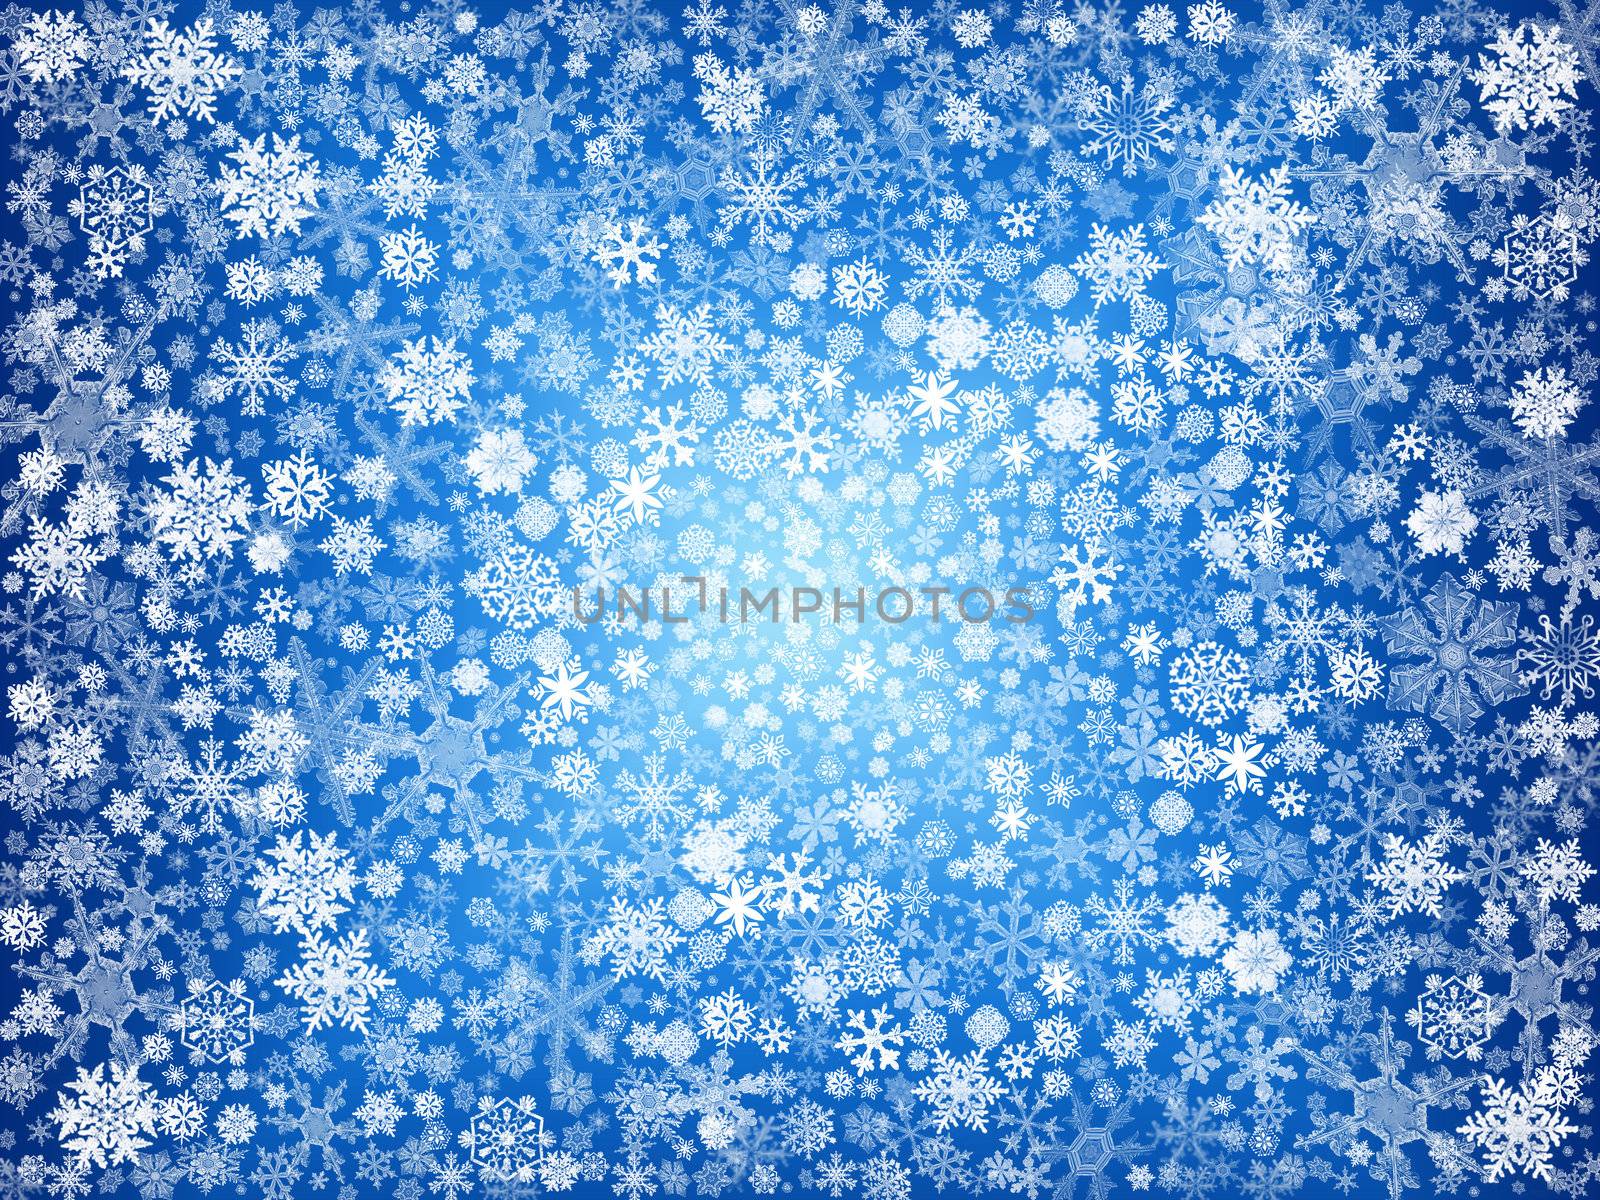 white snowflakes over blue background with feather center
